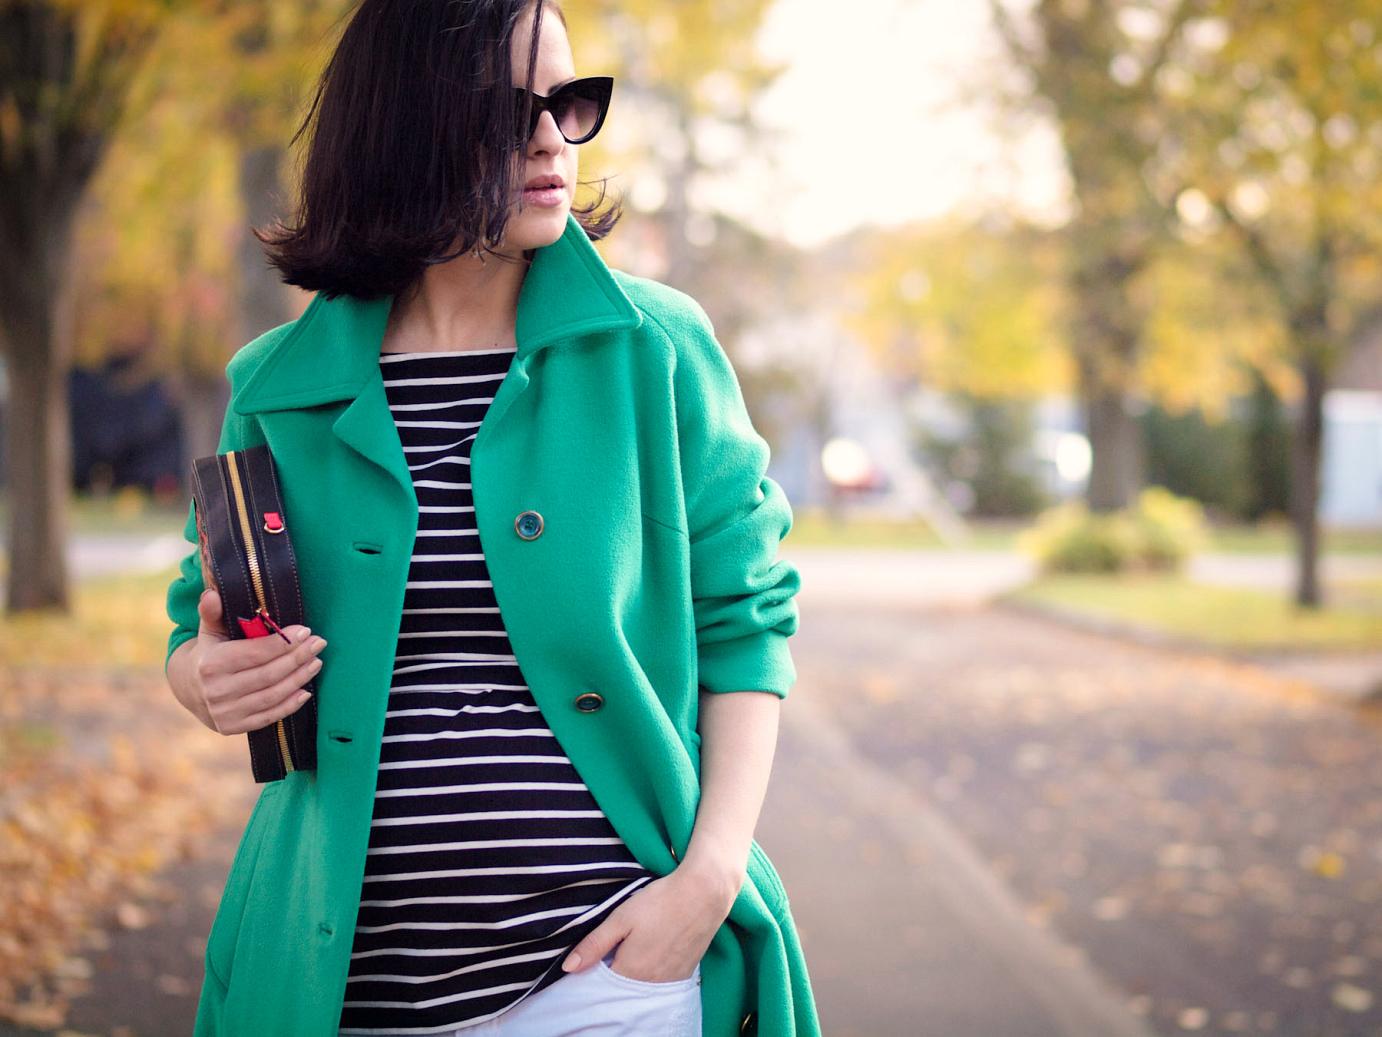 bittersweet colours, street style, fall coats, fall colors, fall trends, fall street style, Manolo Blahnik shoes, meredith wendell, stripes, boyfriend jeans, eye cat sunglasses, maternity style, bump style, 21 weeks, 